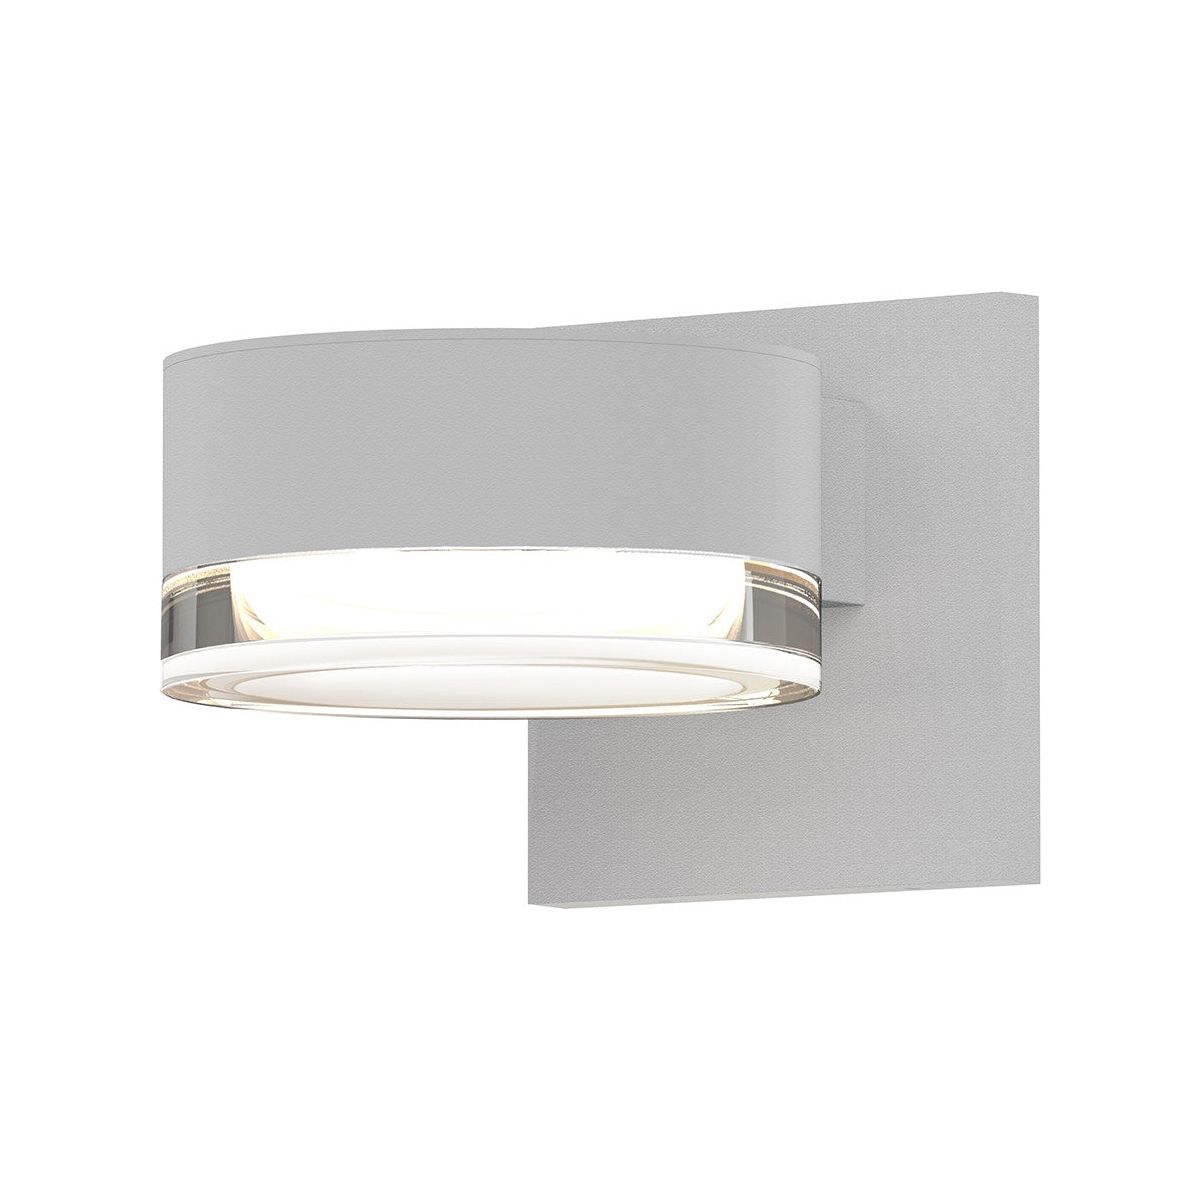 REALS Downlight LED Sconce with Plate Cap and Cylinder Lens